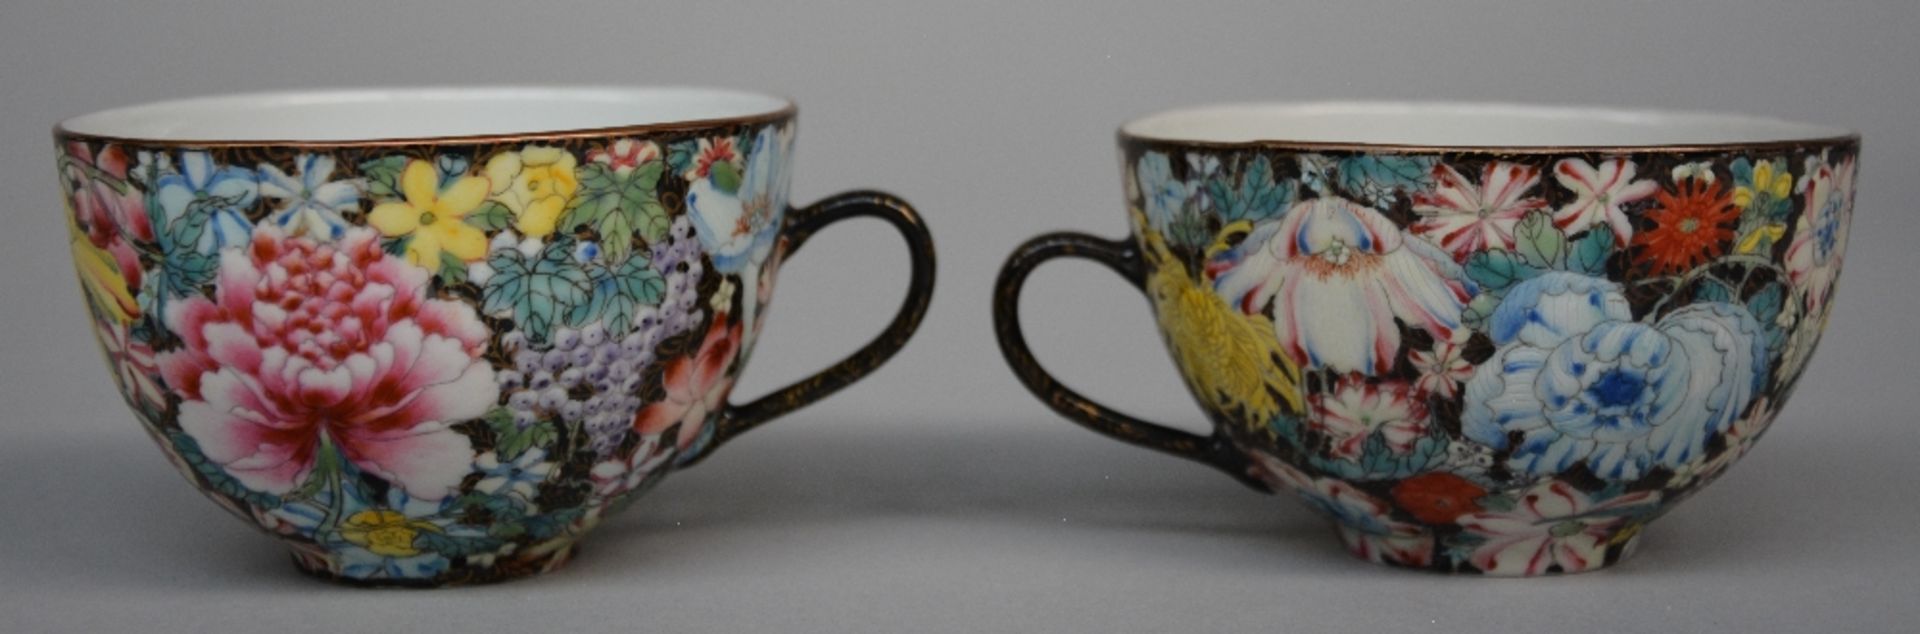 Part of a Chinese tea set with mille-fleurs decoration, marked, first half of 20thC, H 5,5 - 15 - - Bild 6 aus 10